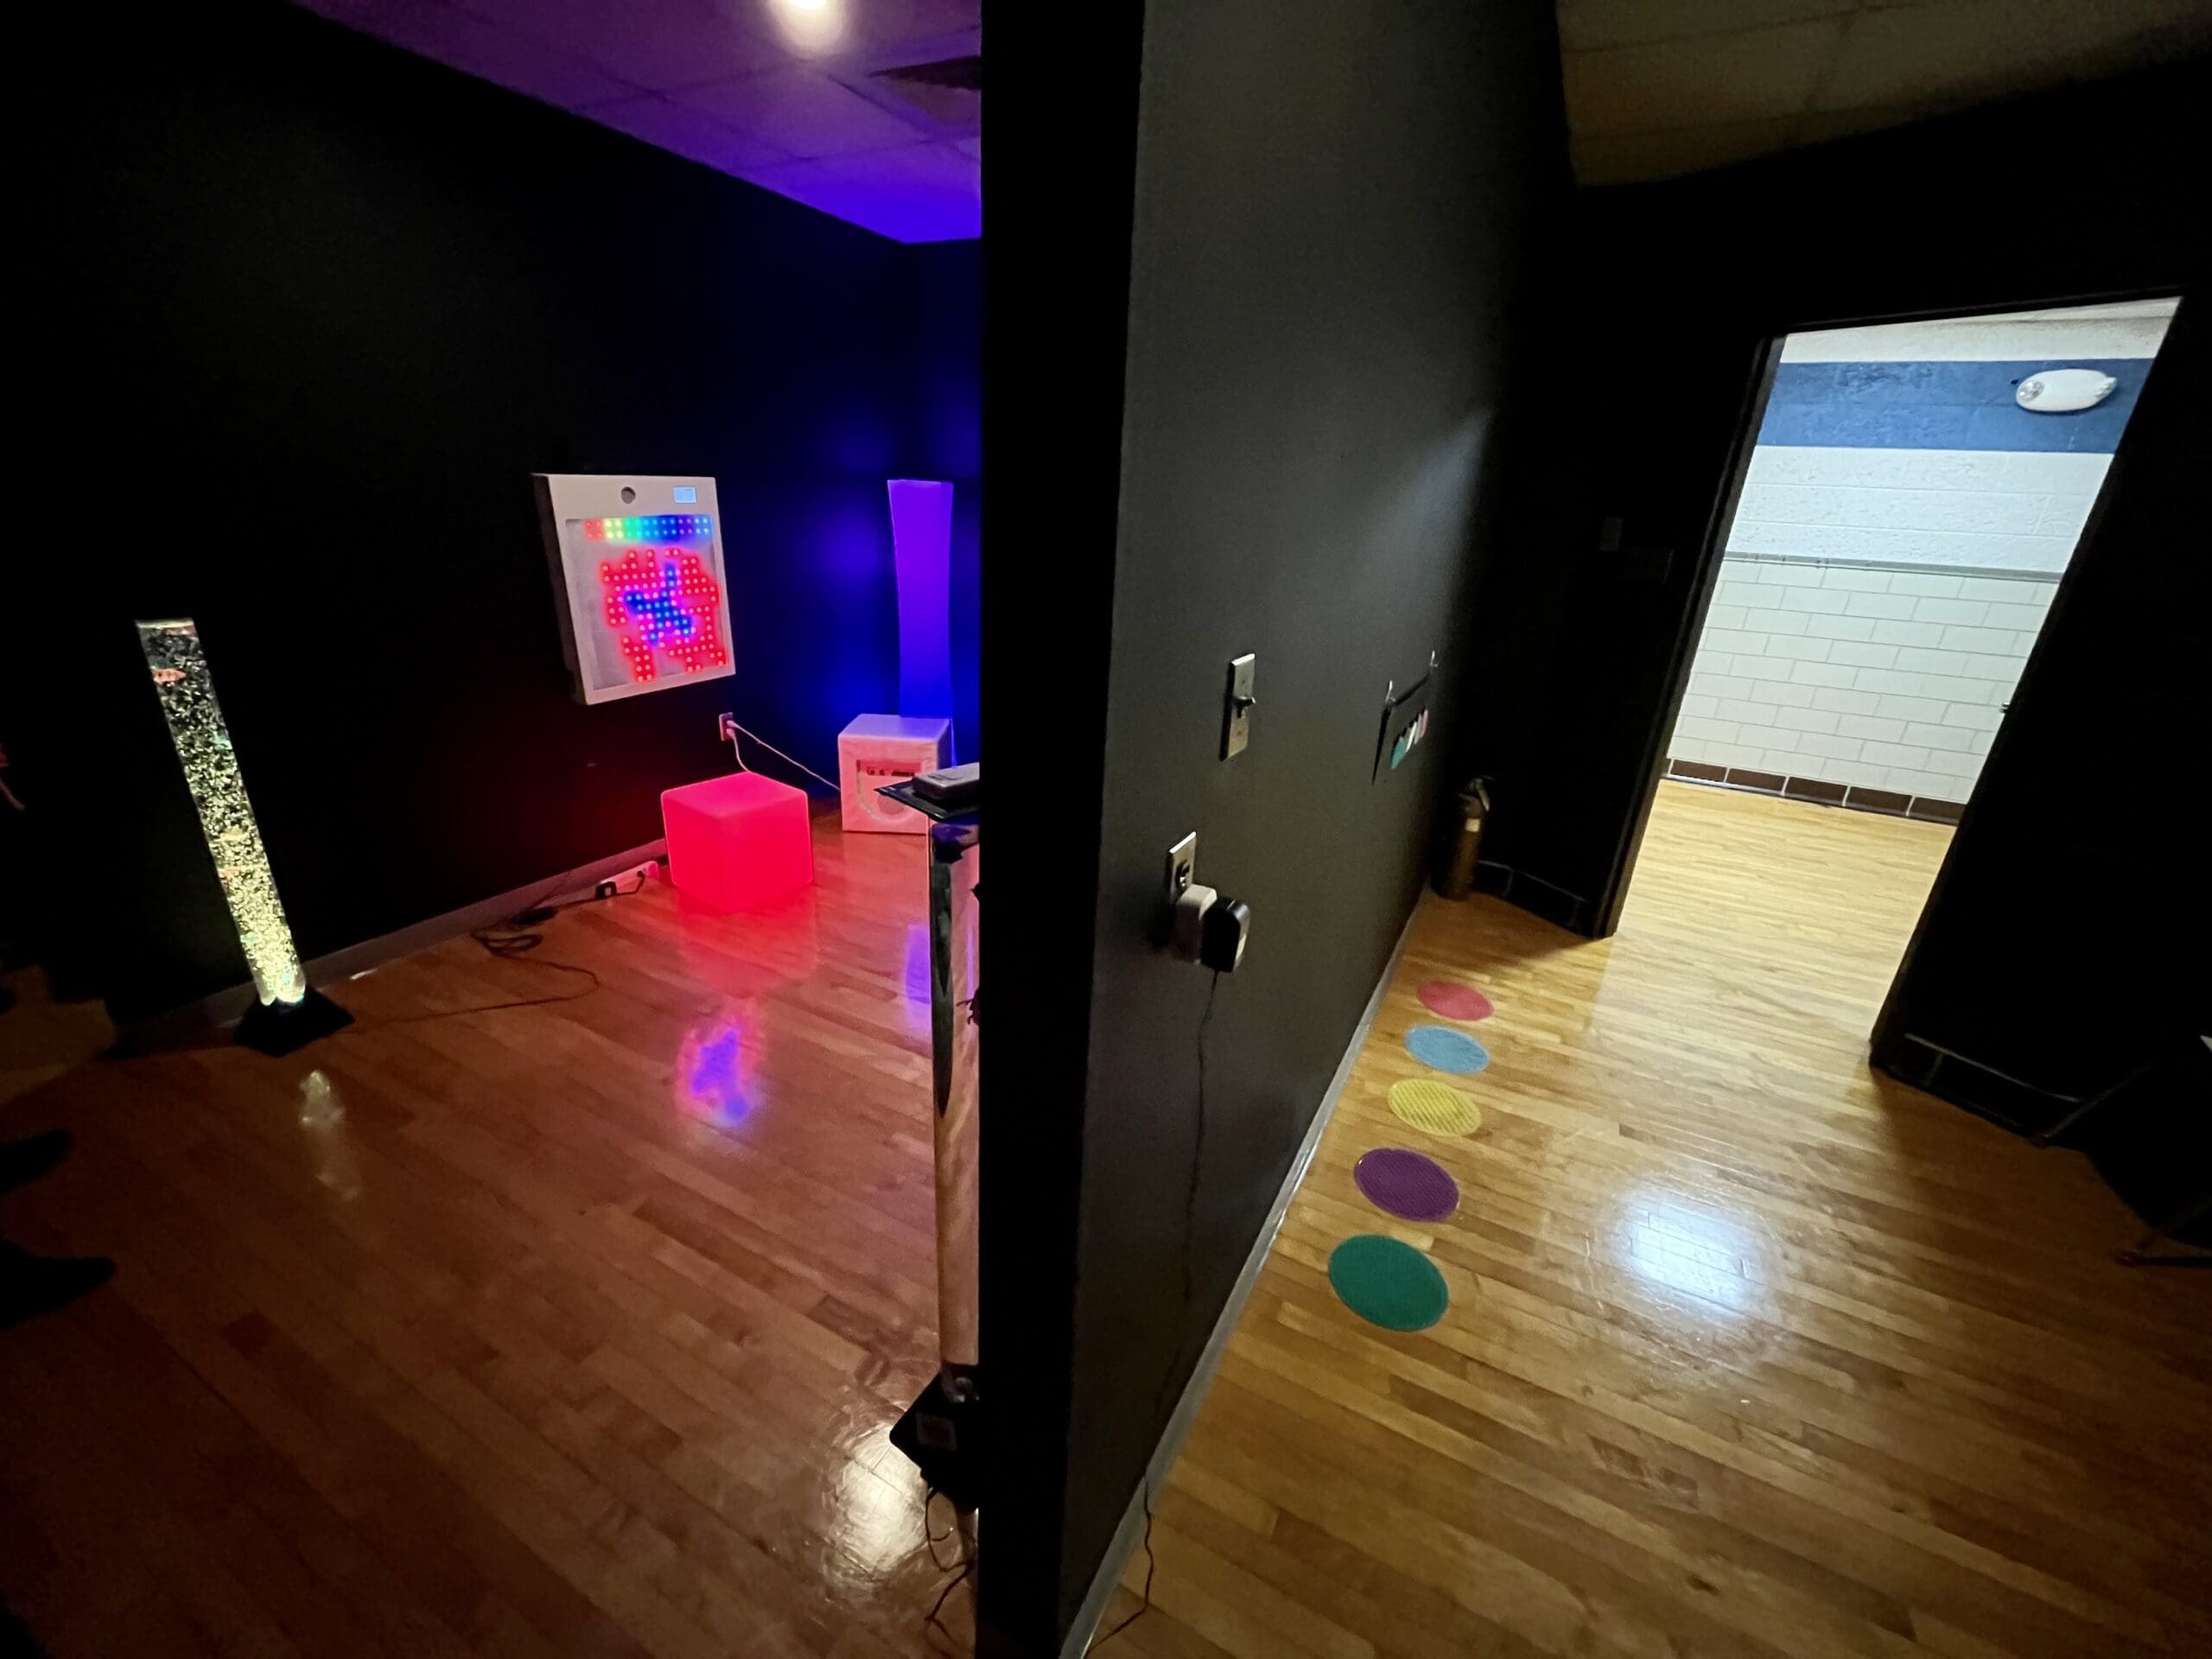 School district fully embracing the sensory room concept